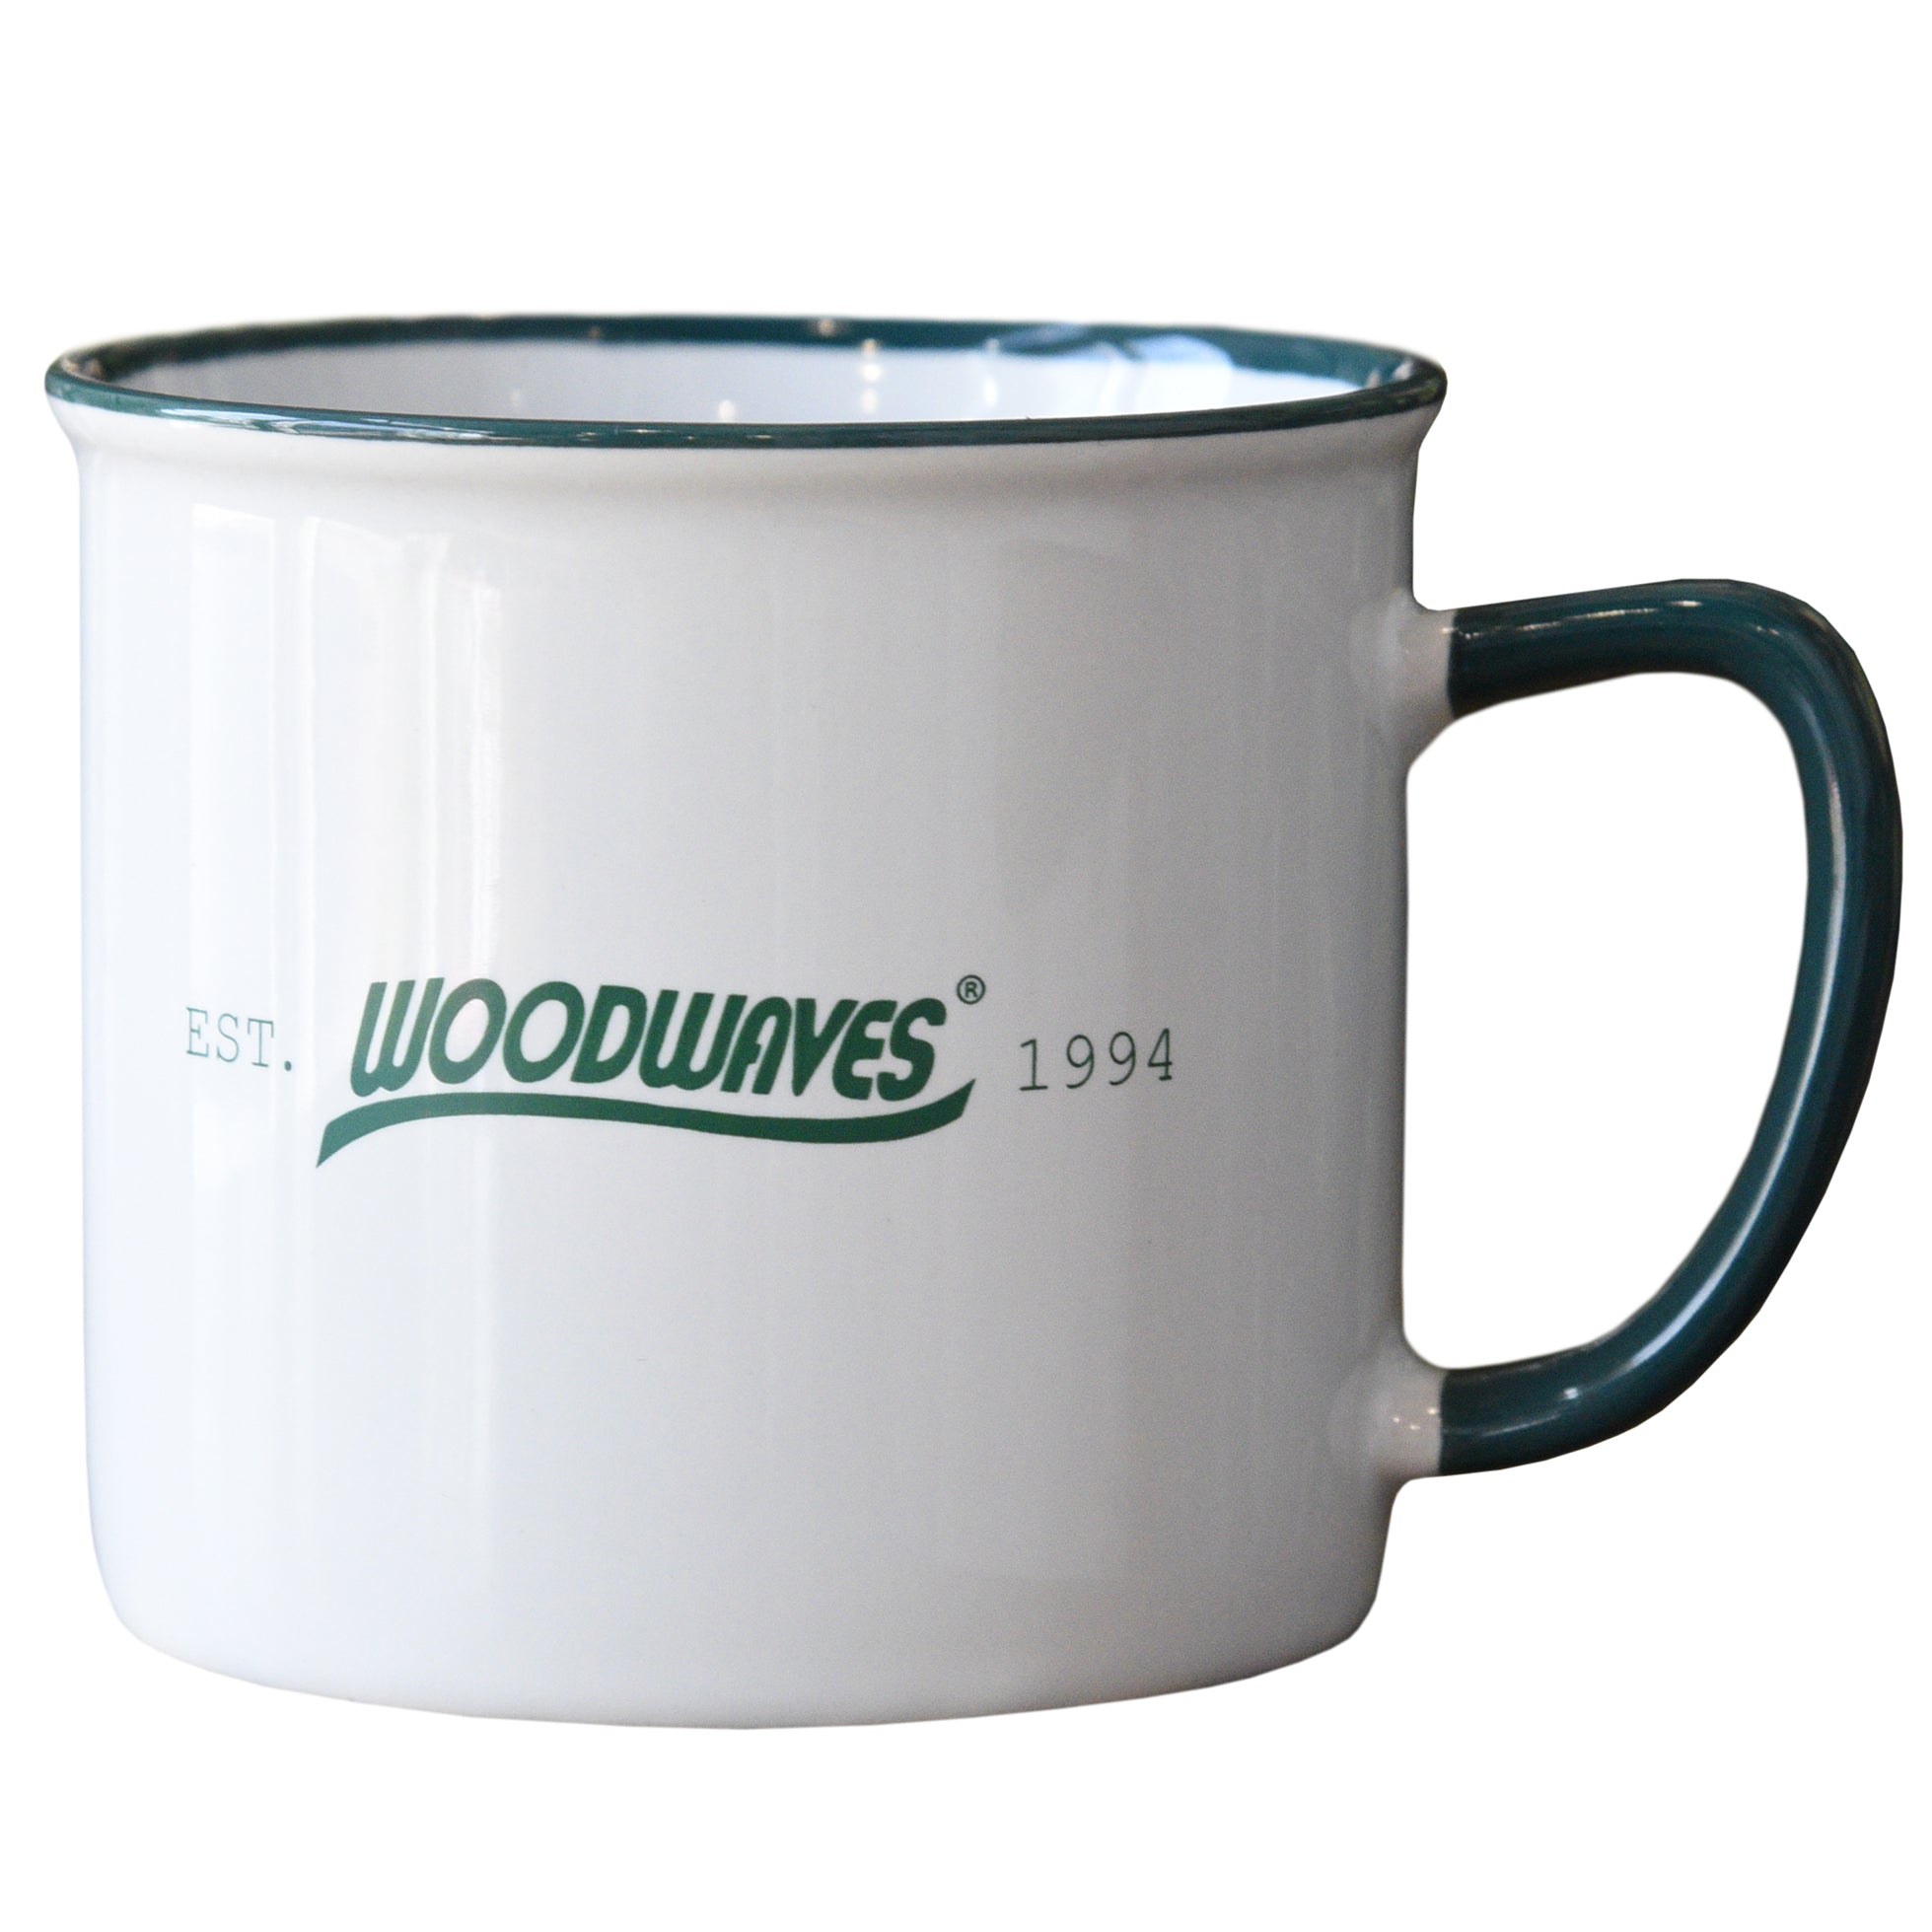 https://www.woodwaves.com/cdn/shop/products/White_Woodwaves_Camping_Style_Coffee_Mug_With_Forest_Green_7cf909cd-c9f8-4bb6-b253-0a89fdbcd294_1959x1959.jpg?v=1612370948